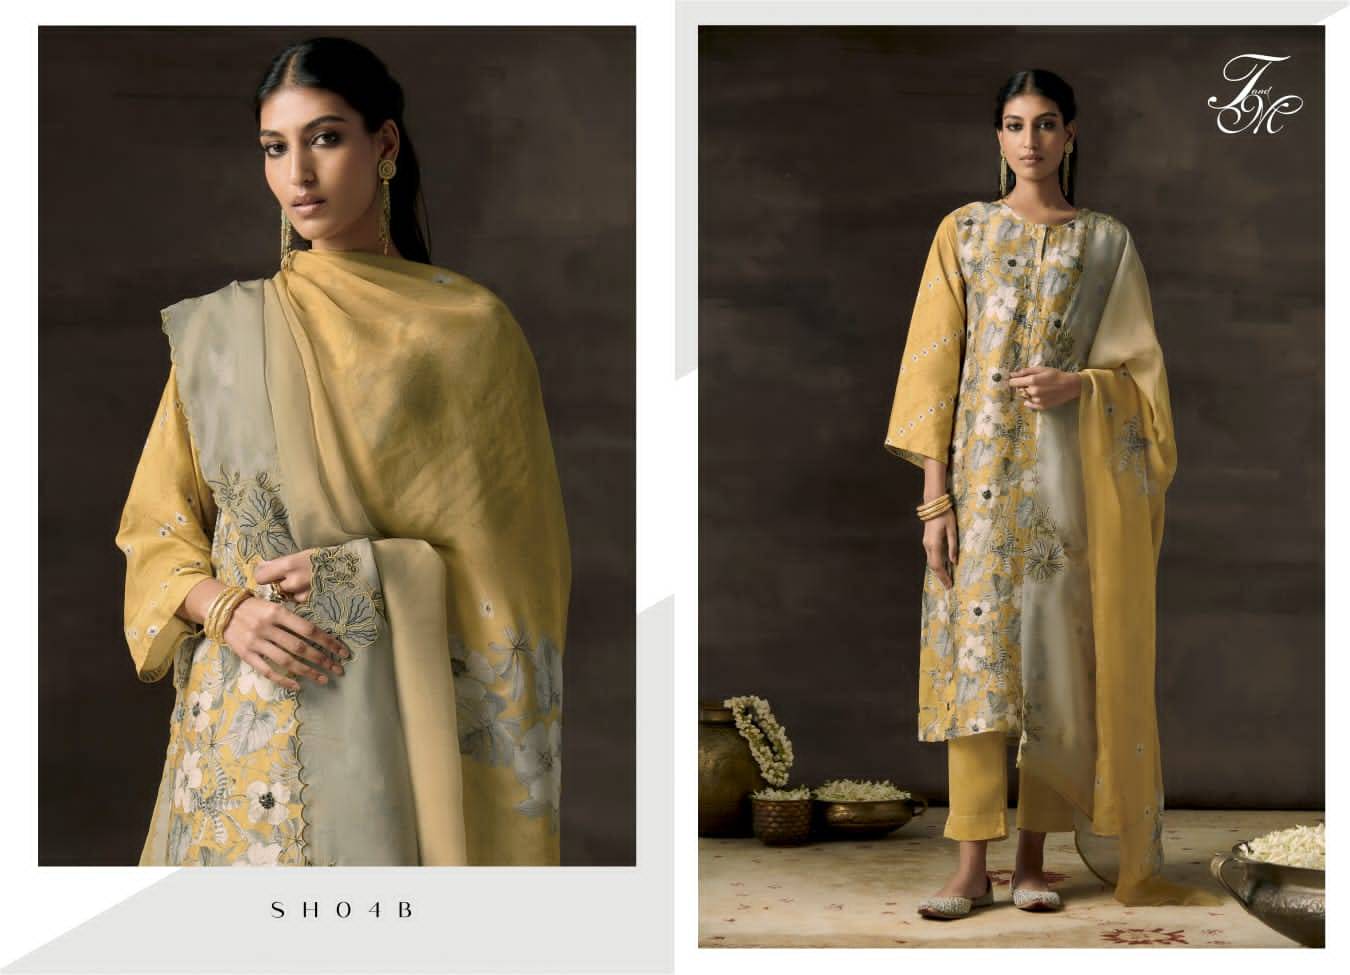 Shruti-04 Colours By T And M Designer Studio 04-A To 04-B Series Beautiful Festive Suits Colorful Stylish Fancy Casual Wear & Ethnic Wear Bemberg Silk Digital Print Dresses At Wholesale Price